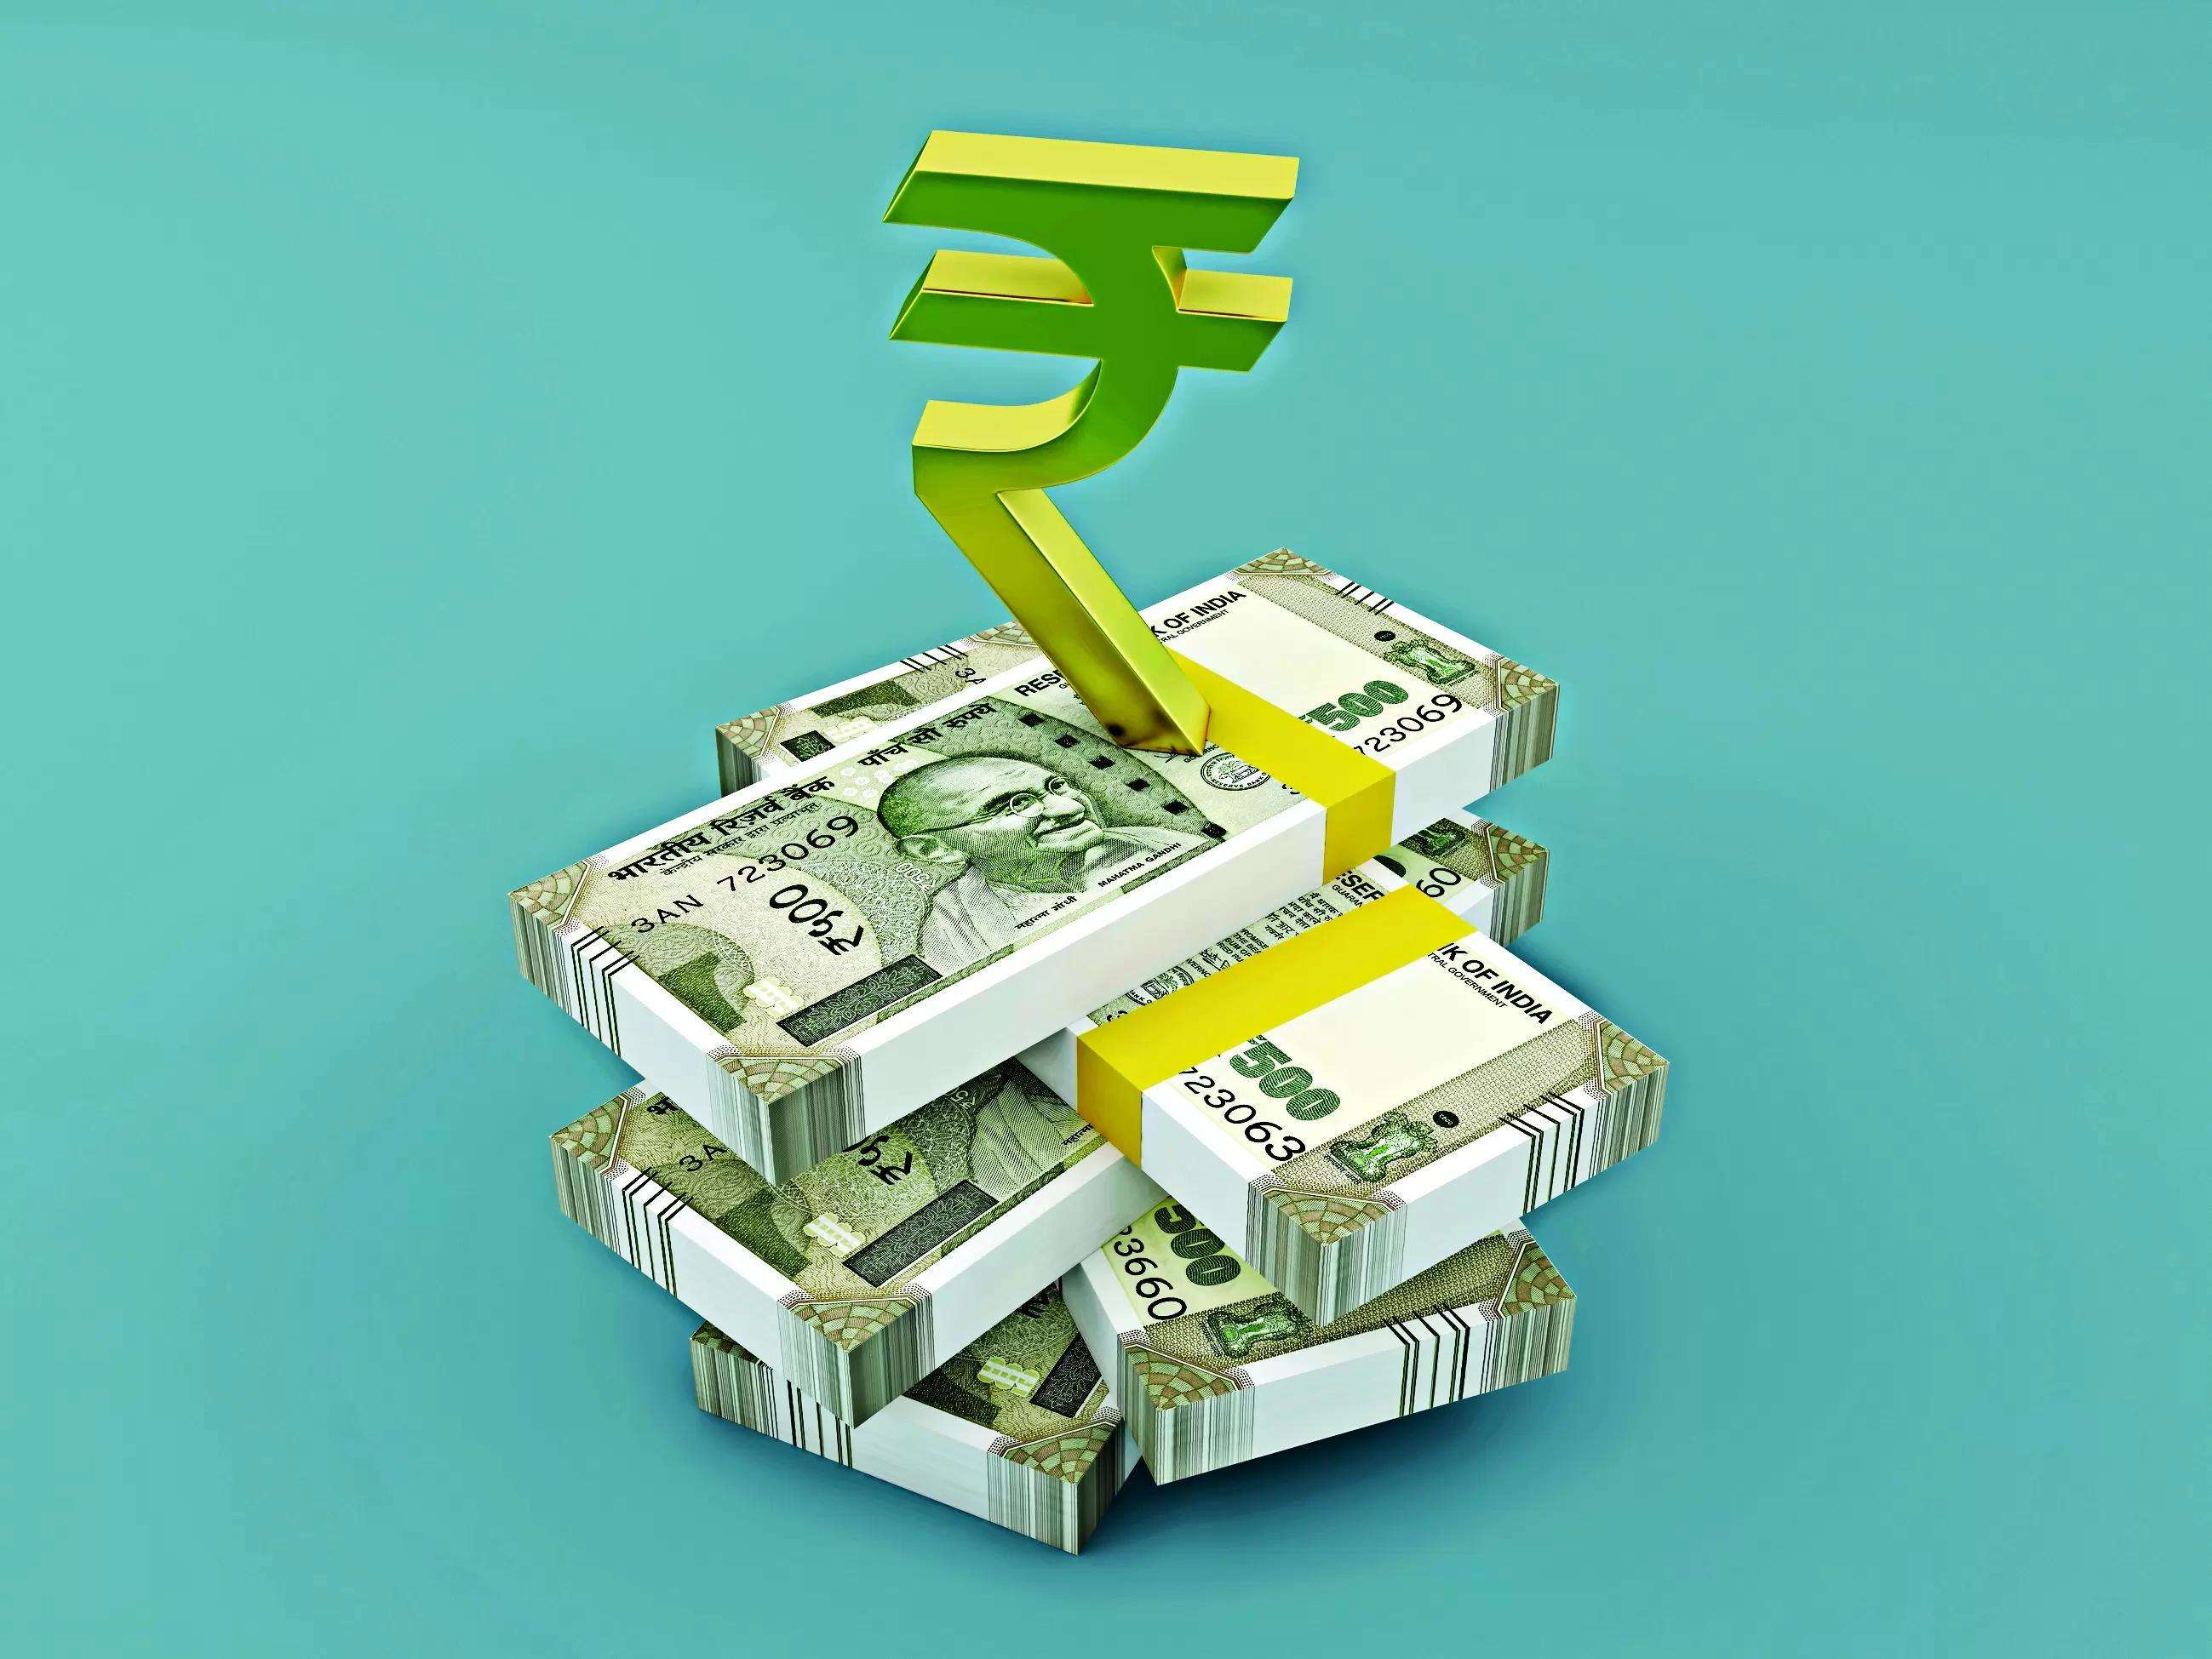 Payments companies seek share of sops to keep low value UPI free